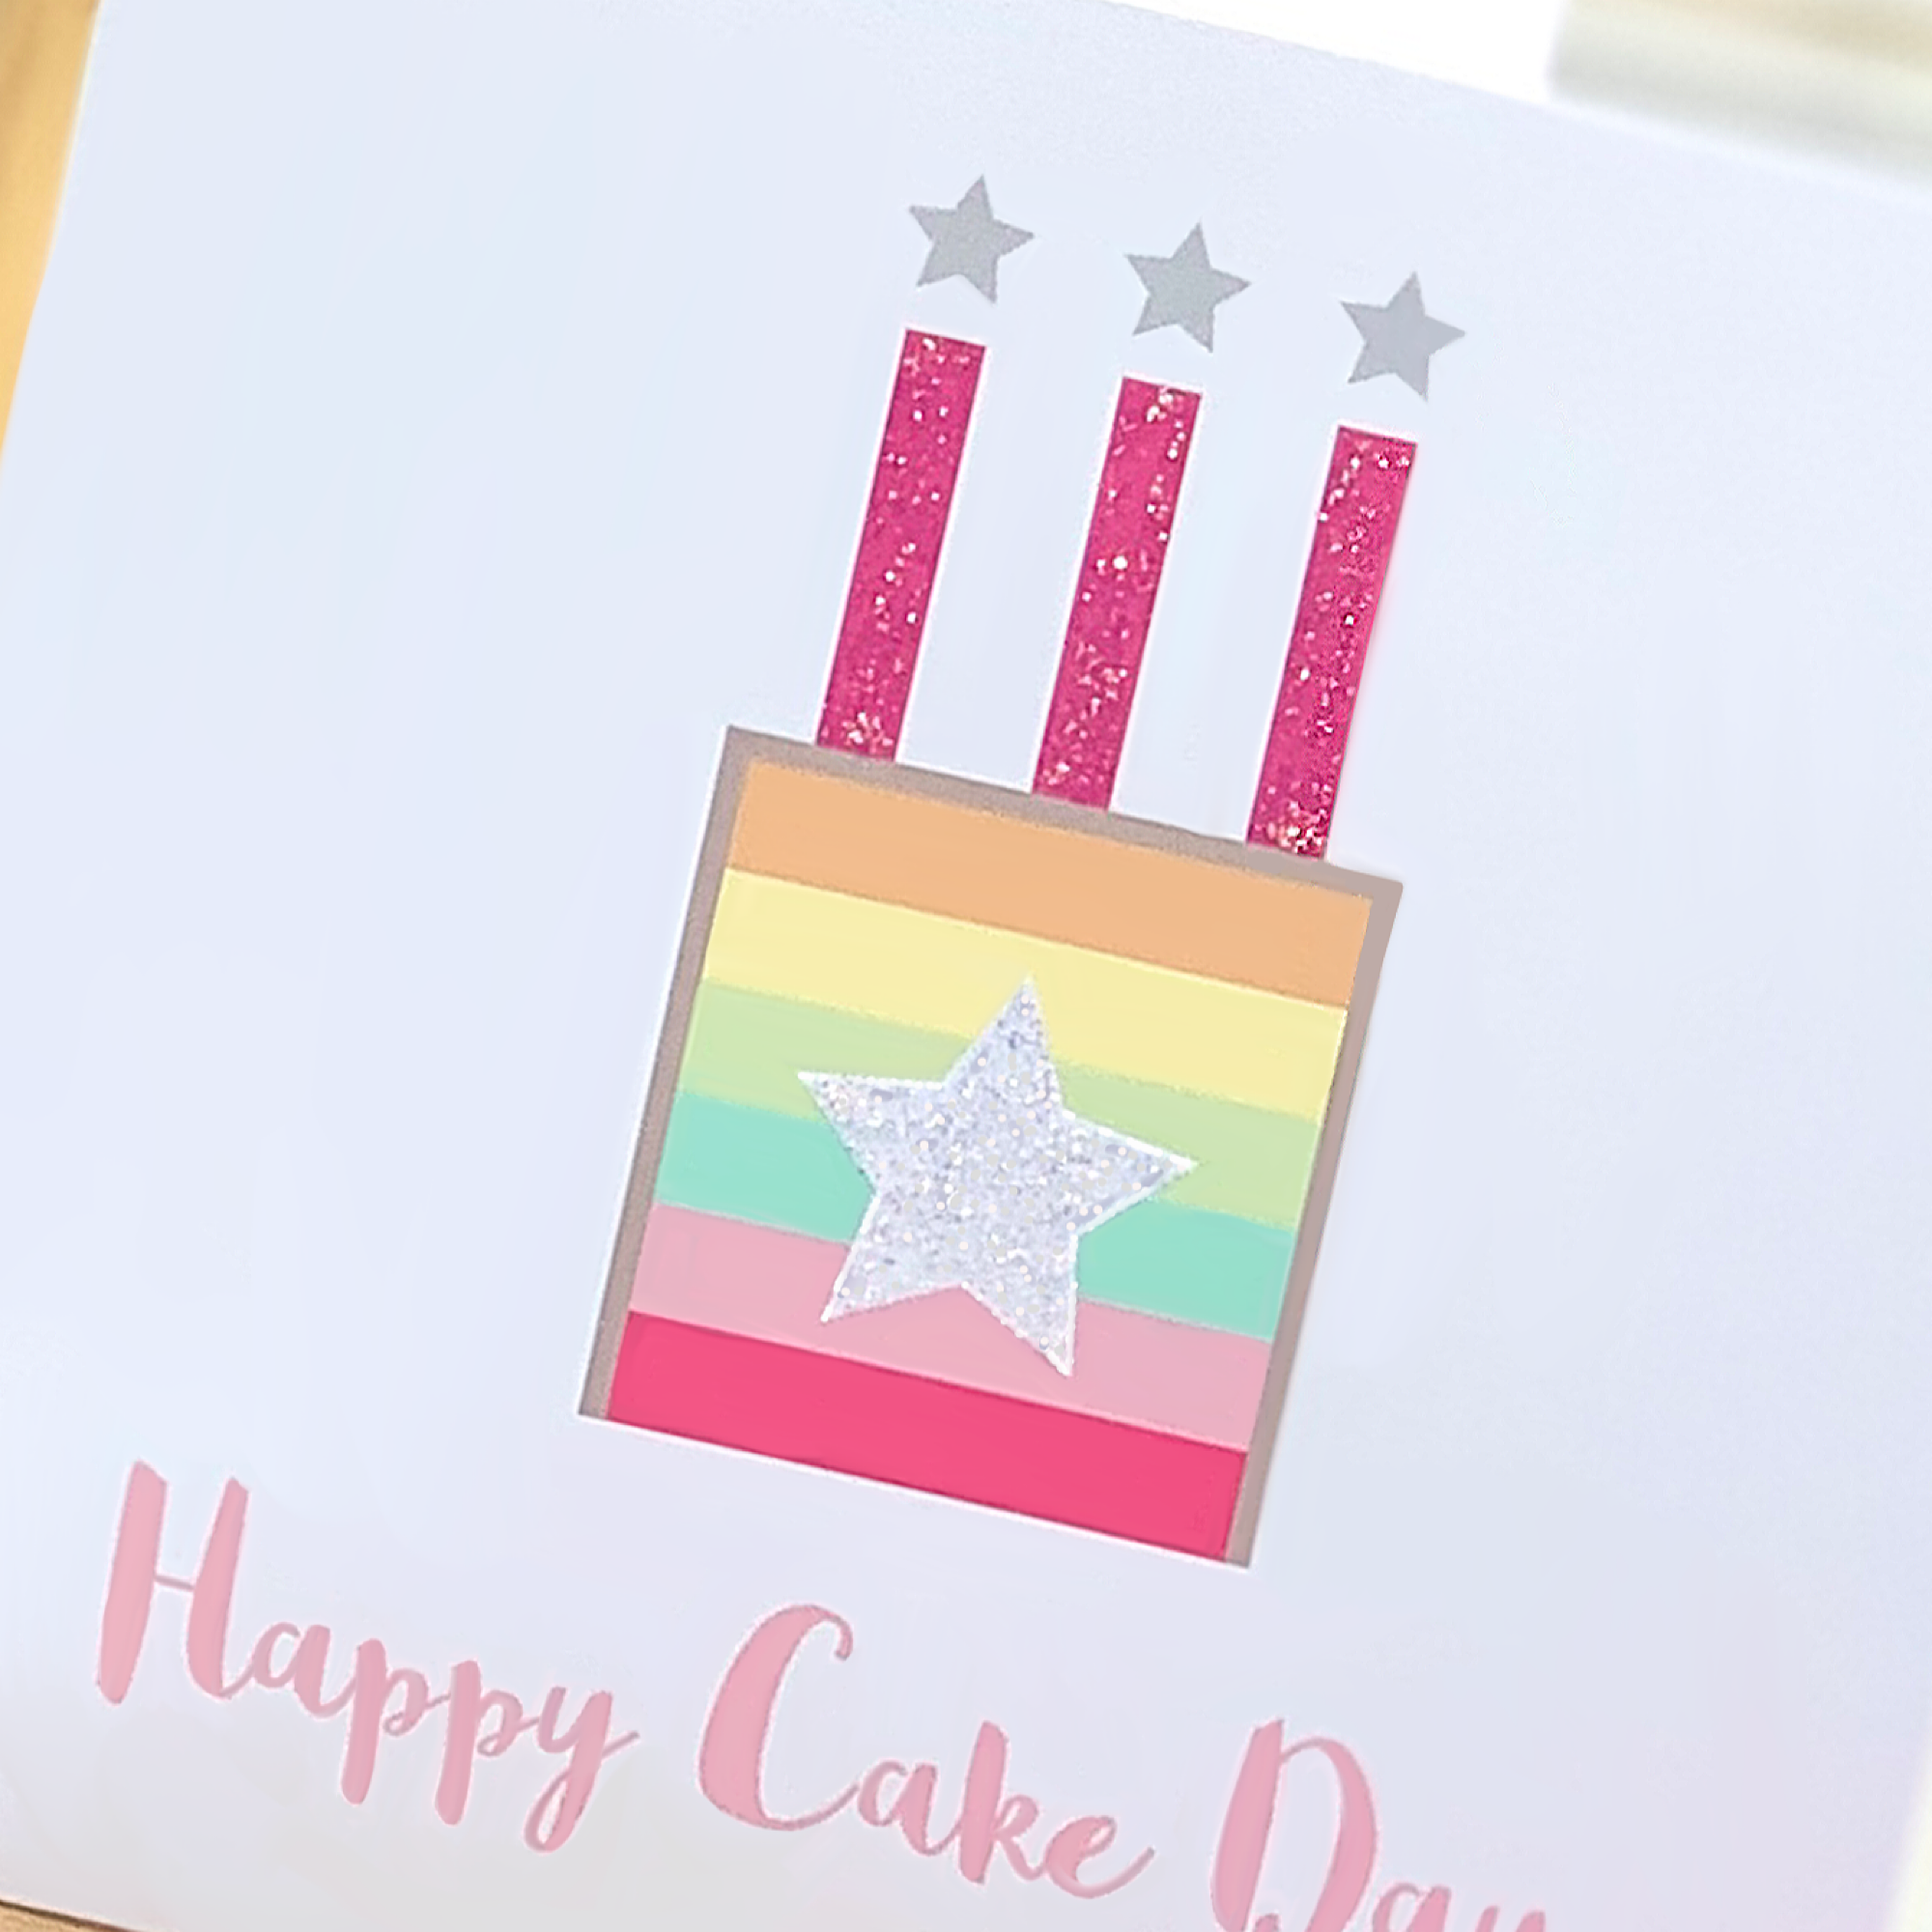 Glittery Pink Happy Birthday Cake Card with Candles